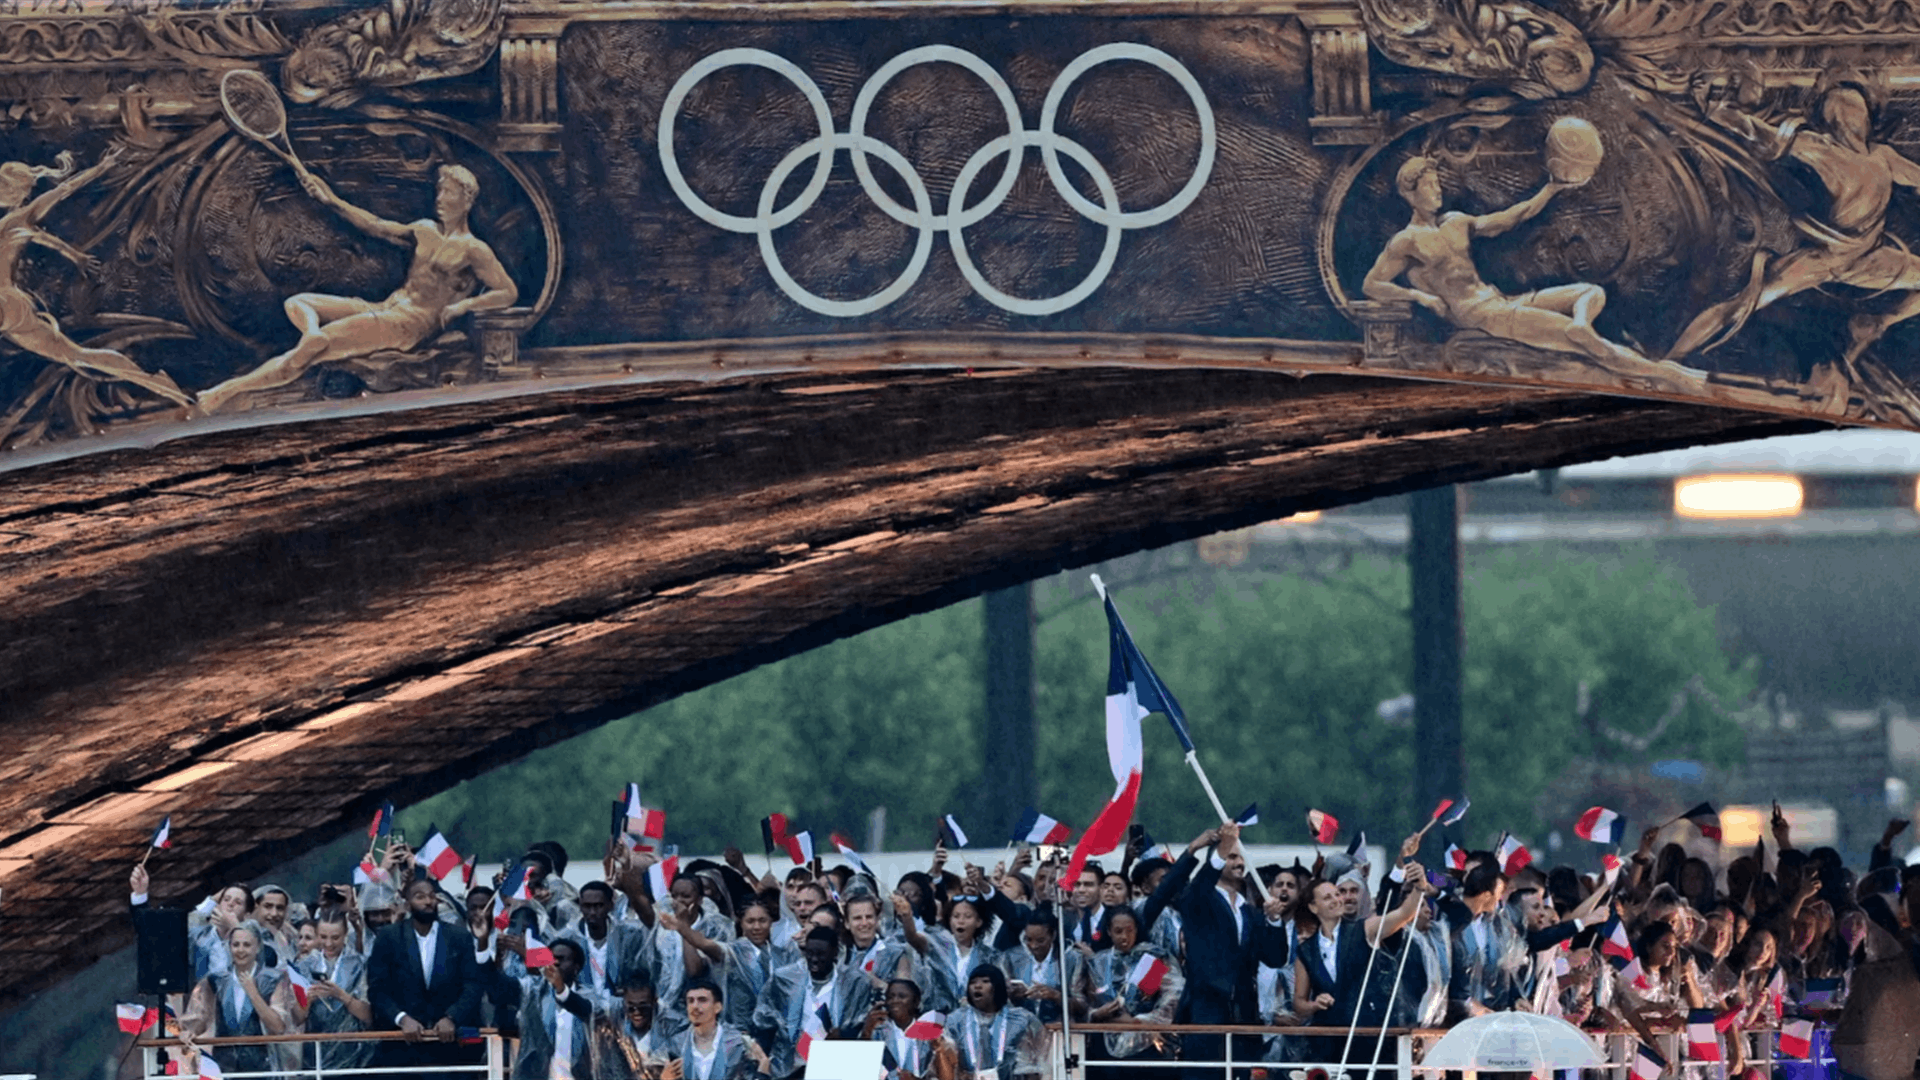 Paris Olympics 2024: France welcomes the world with mesmerizing Olympic opening on the Seine